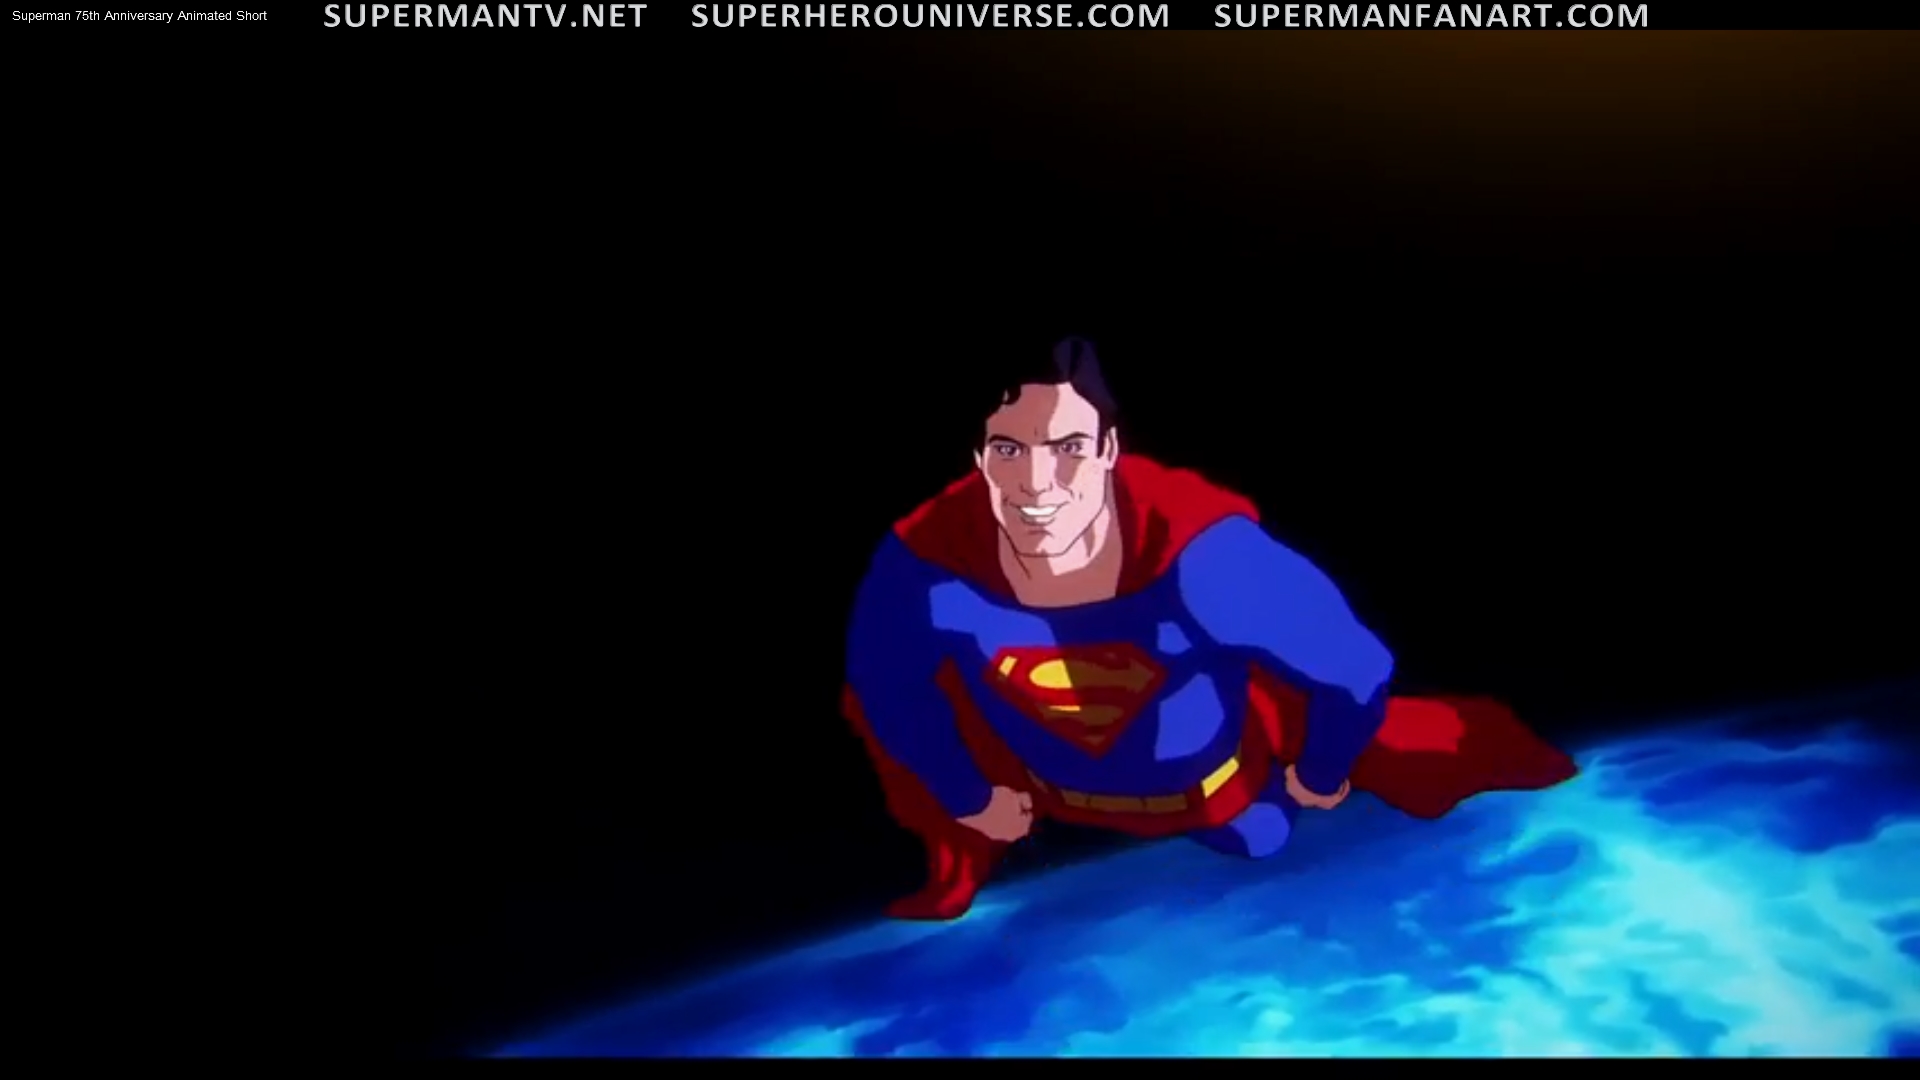 Christopher Reeve 75th Superman Anniversary